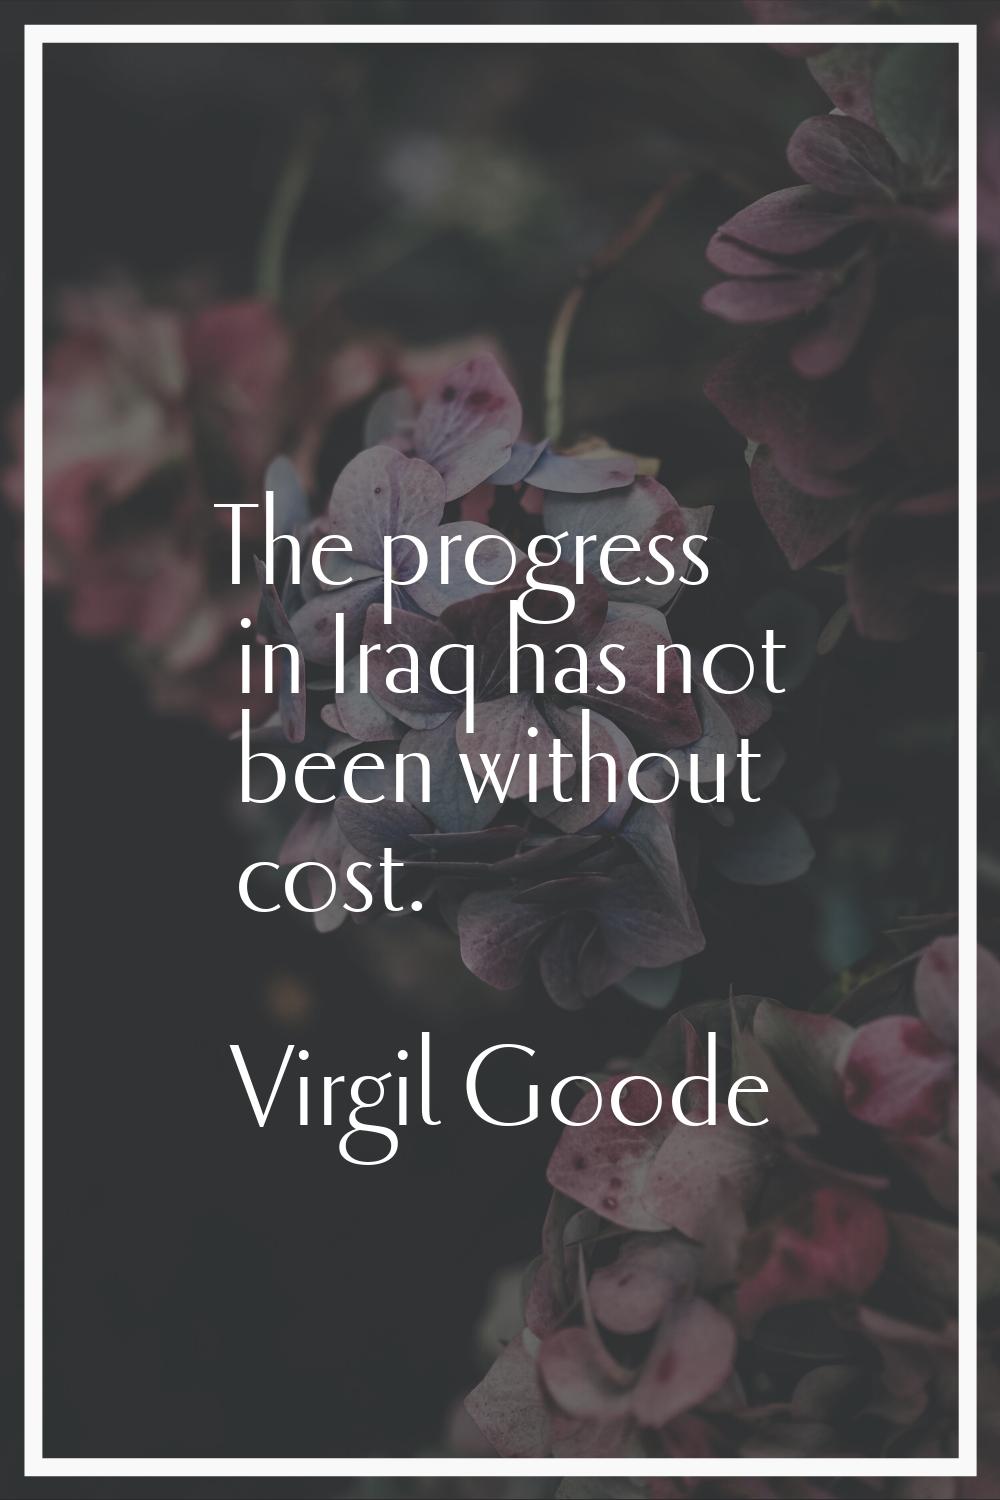 The progress in Iraq has not been without cost.